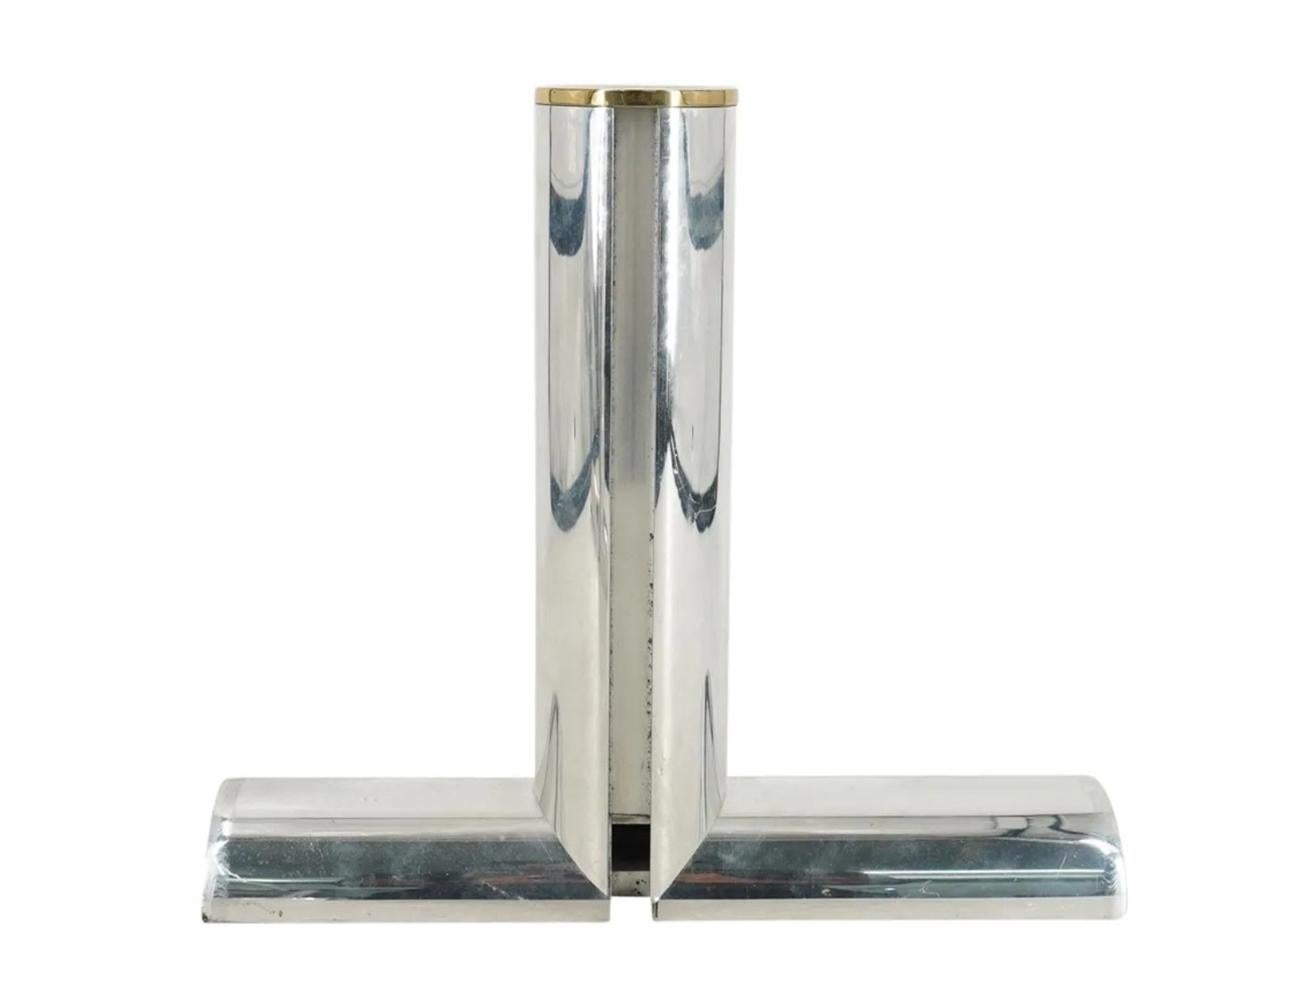 Hand-Crafted Set of 3 Wall Shelfs in Polished Aluminum & Brass Attb to Karl Springer For Sale